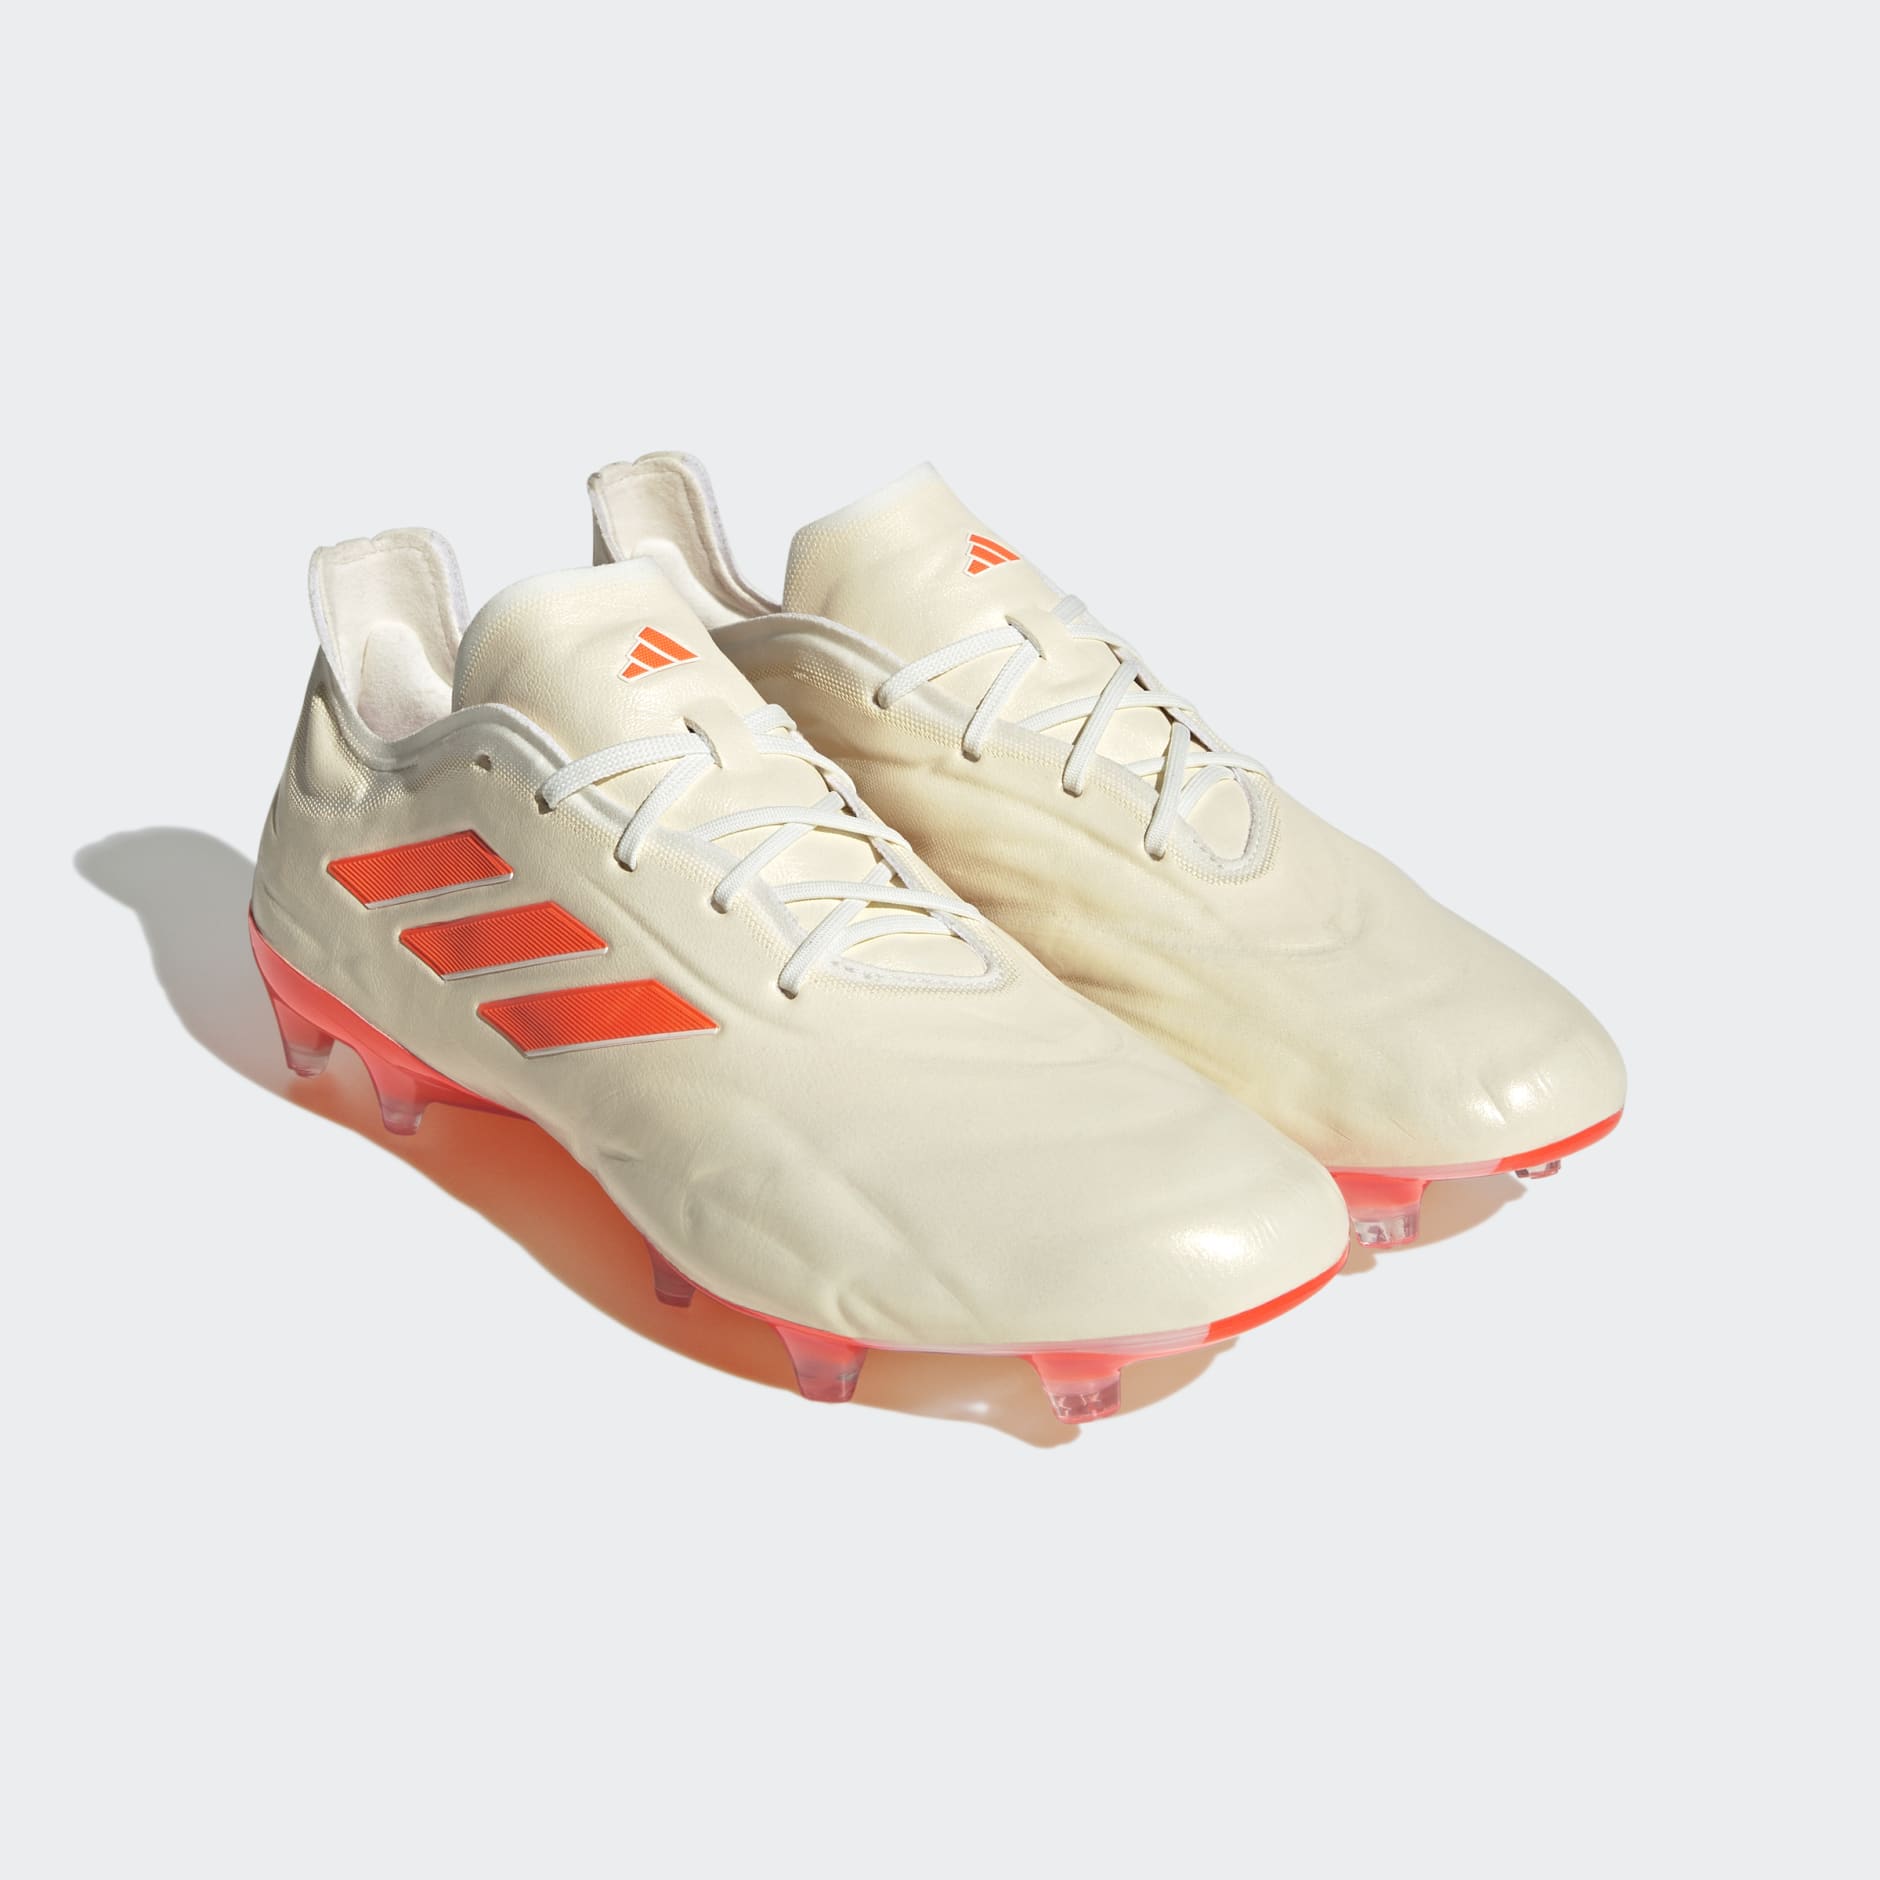 adidas Copa Pure.1 Firm Ground Boots - White | adidas UAE